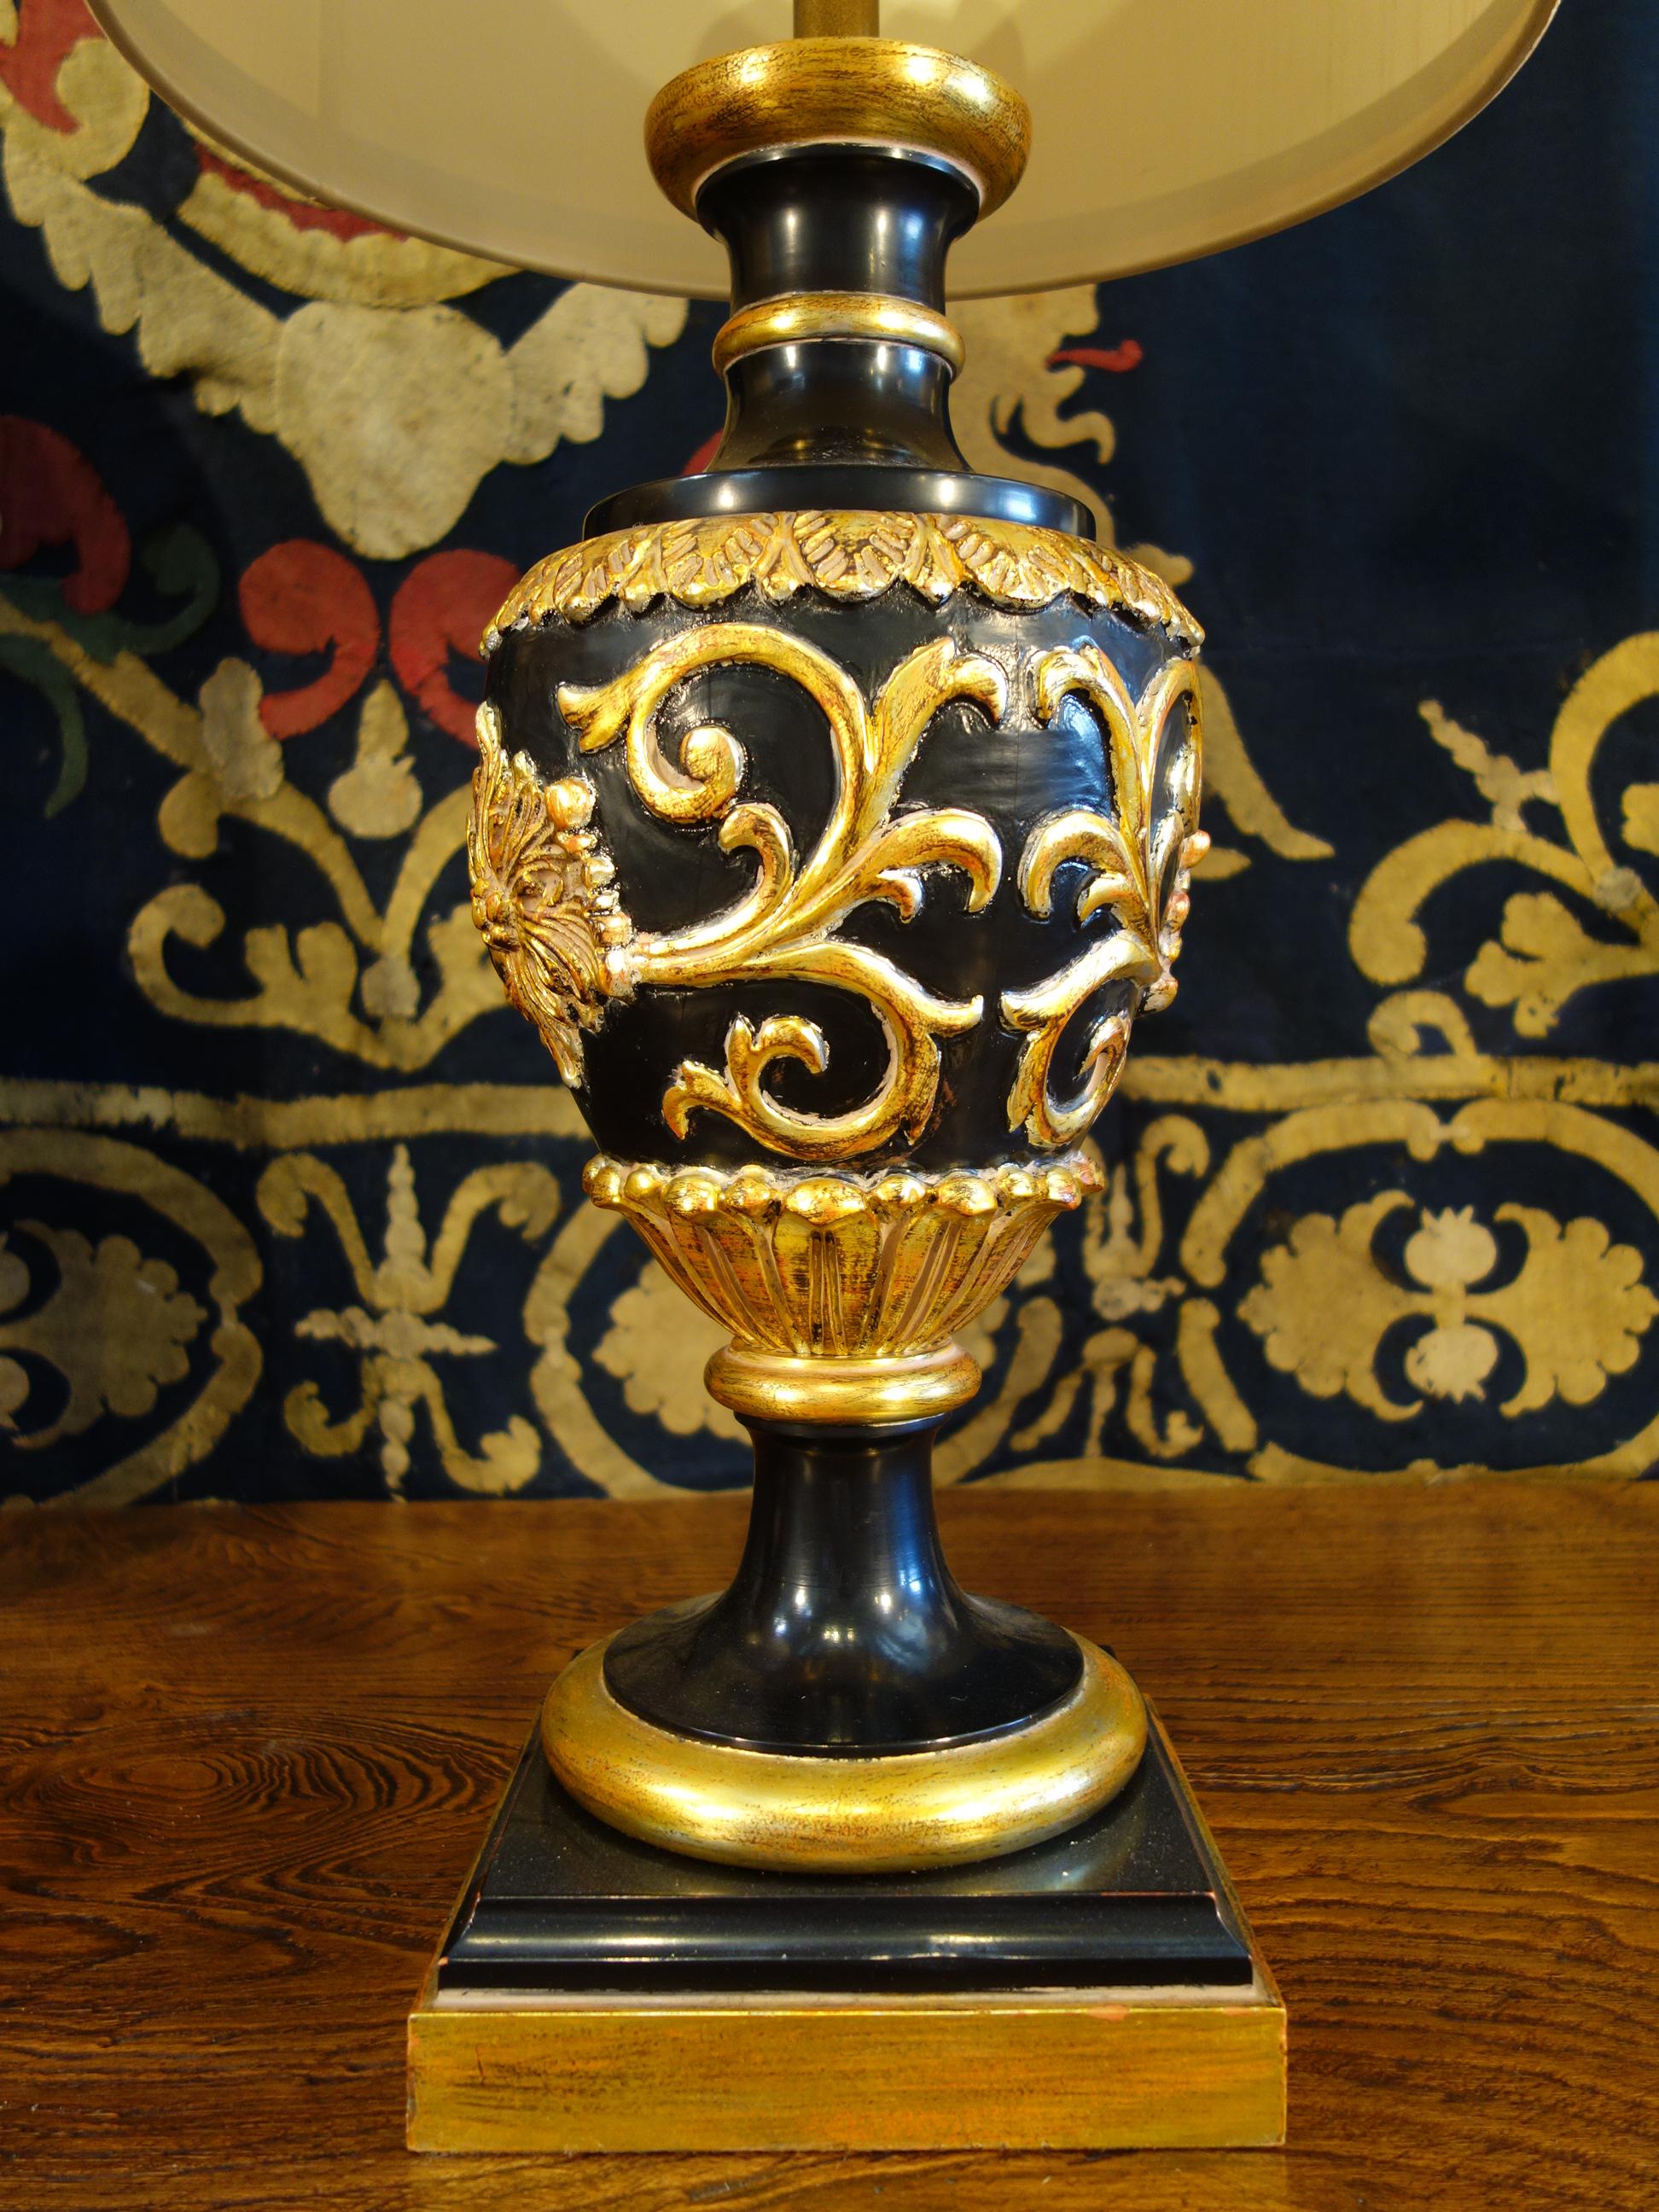 Monumental pair of Italian Renaissance Style gilt table lamps by world-renowned Marbro Lamp Company of Los Angeles USA, circa 1950.
Black lacquered and gold gilted. Each lamp measures 42.5